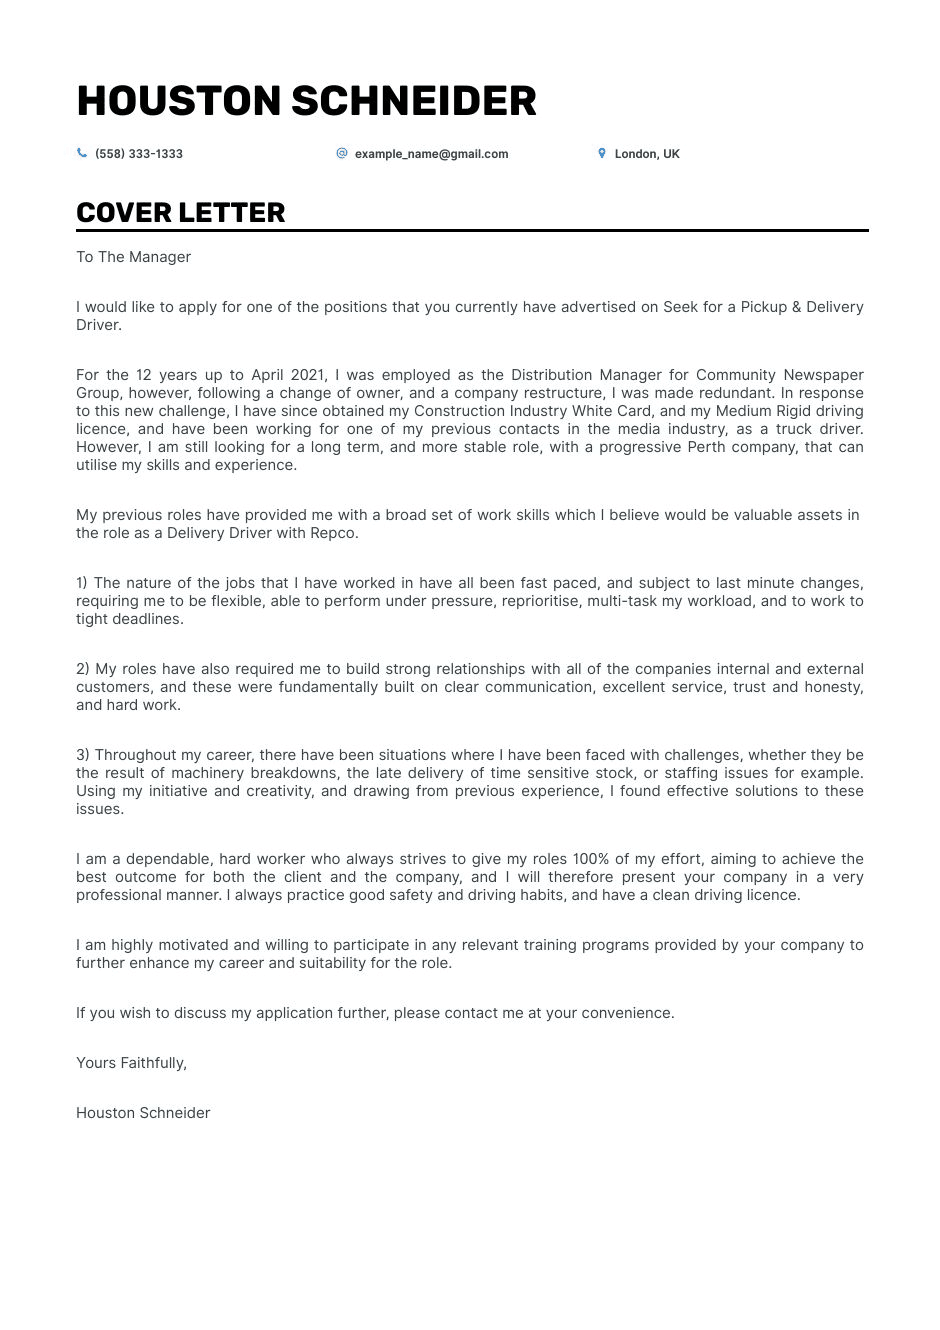 delivery driver coverletter.png